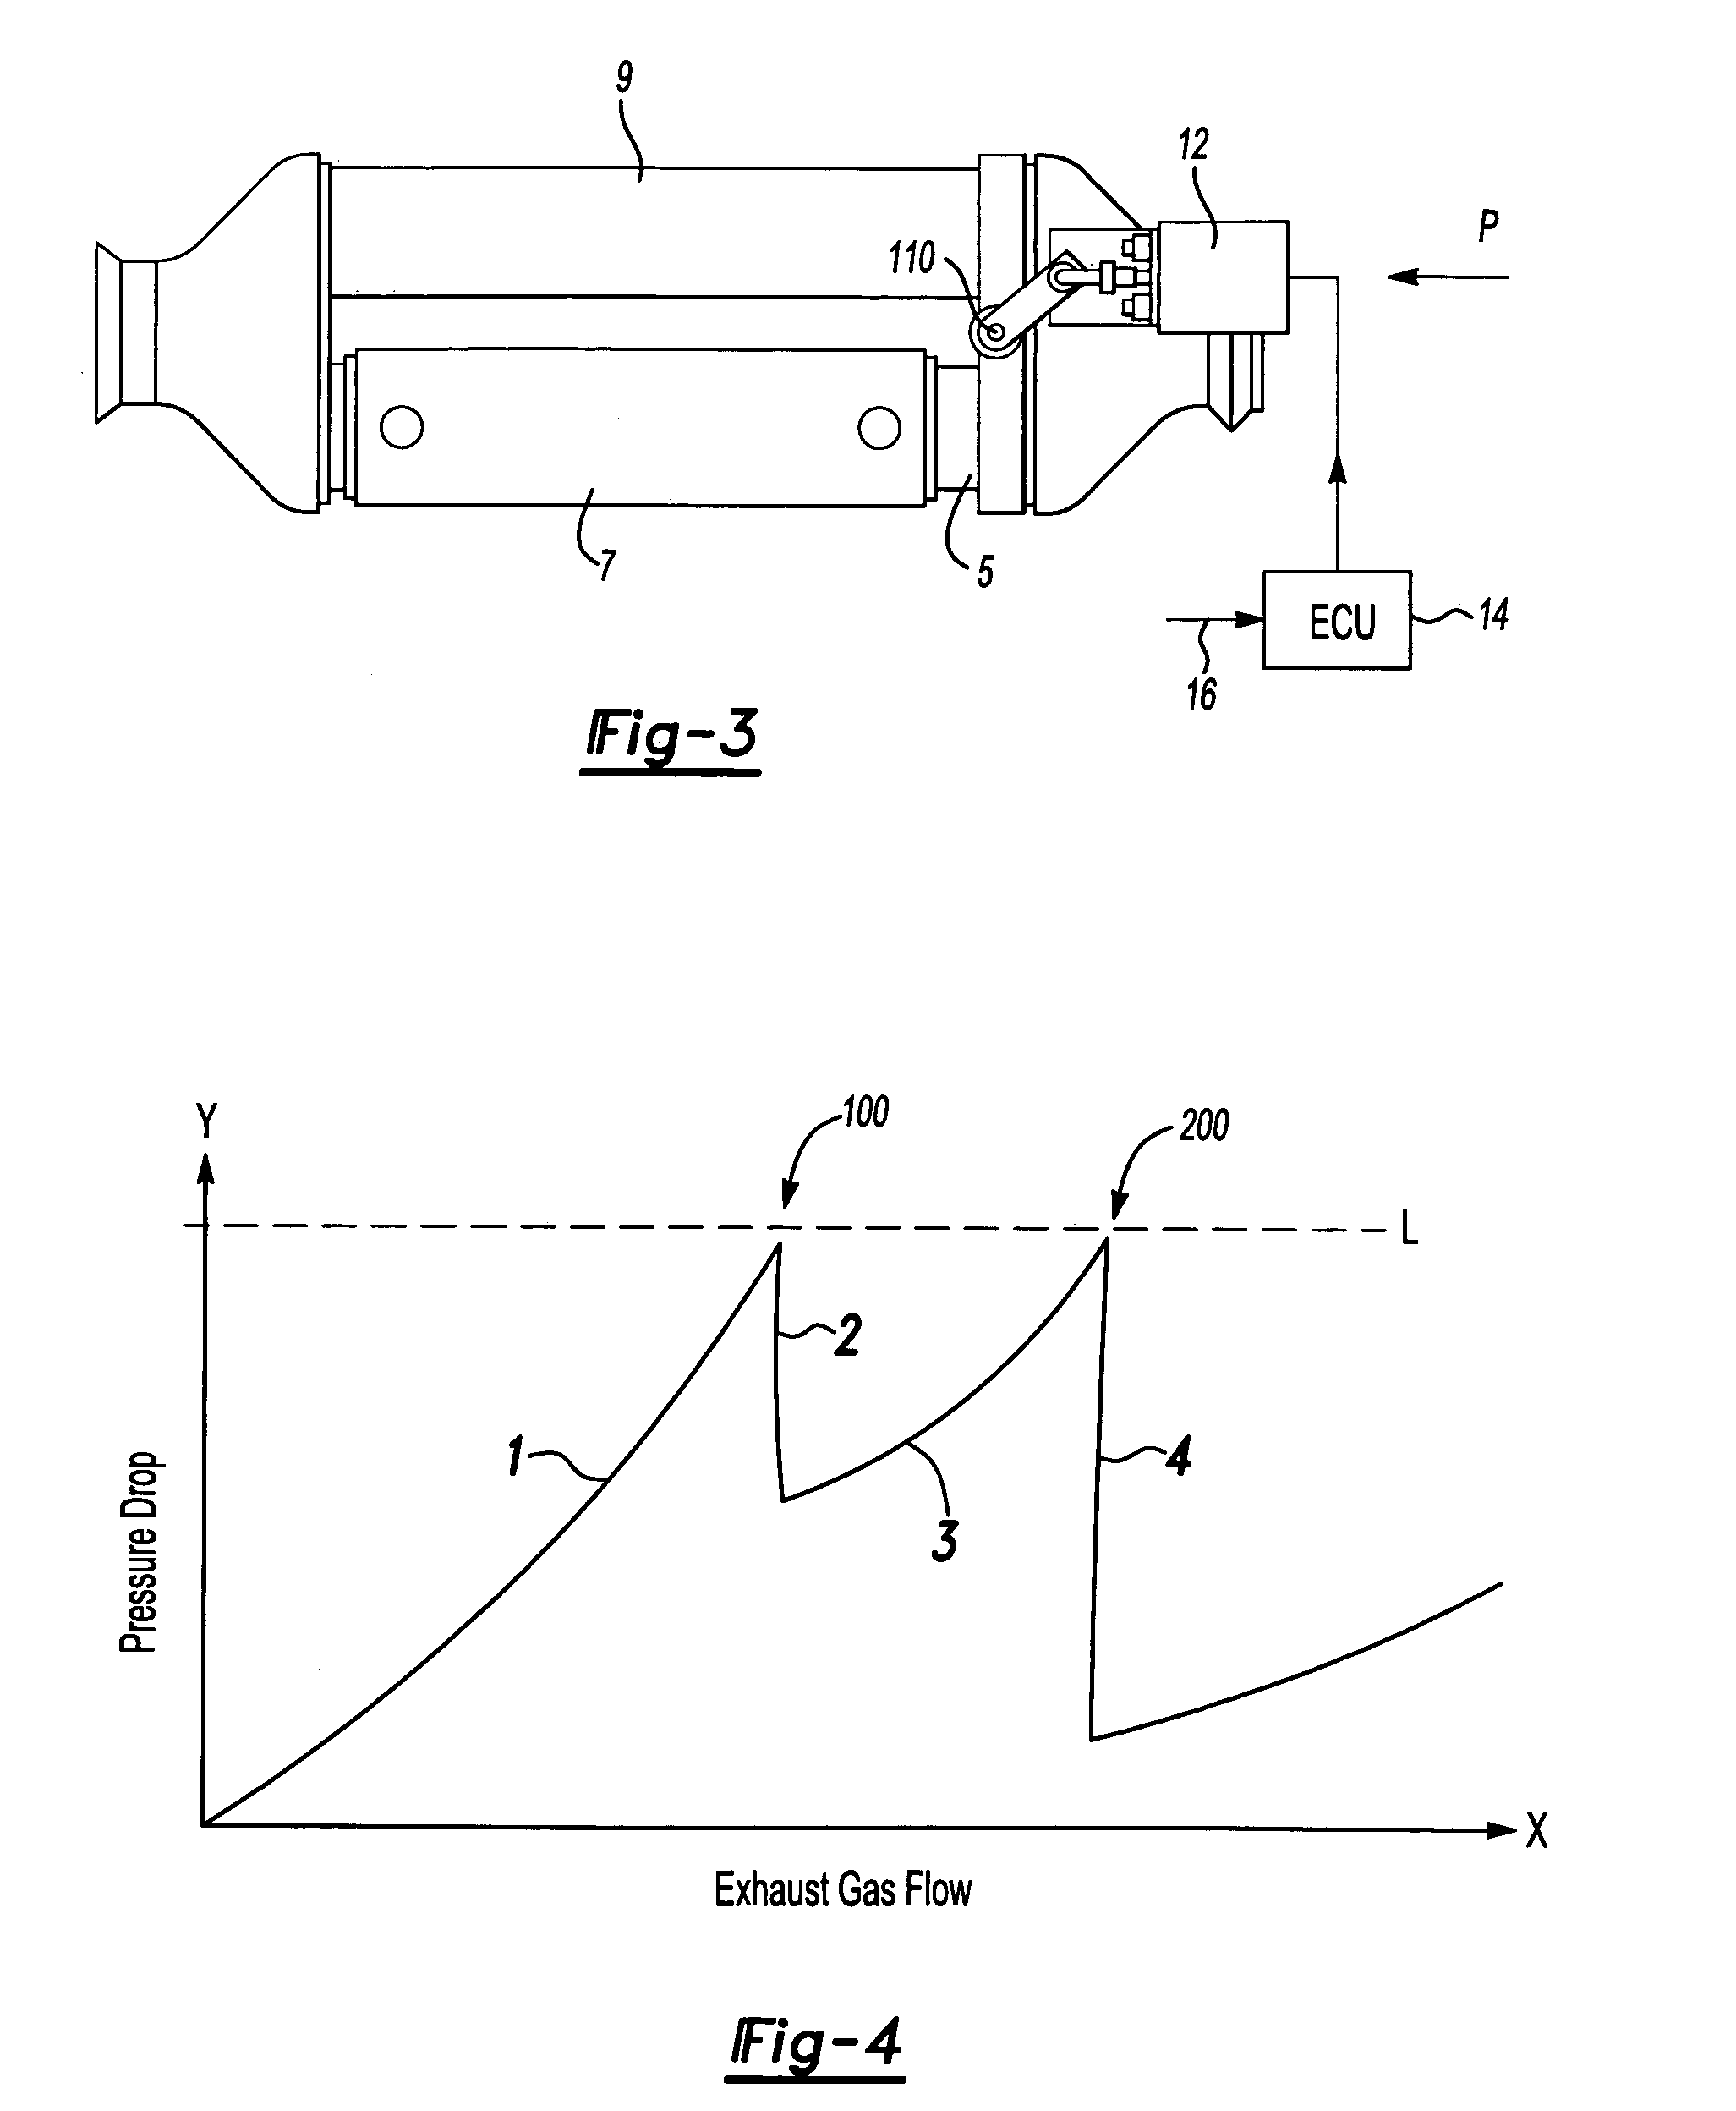 Method for controlling a valve for an exhaust system